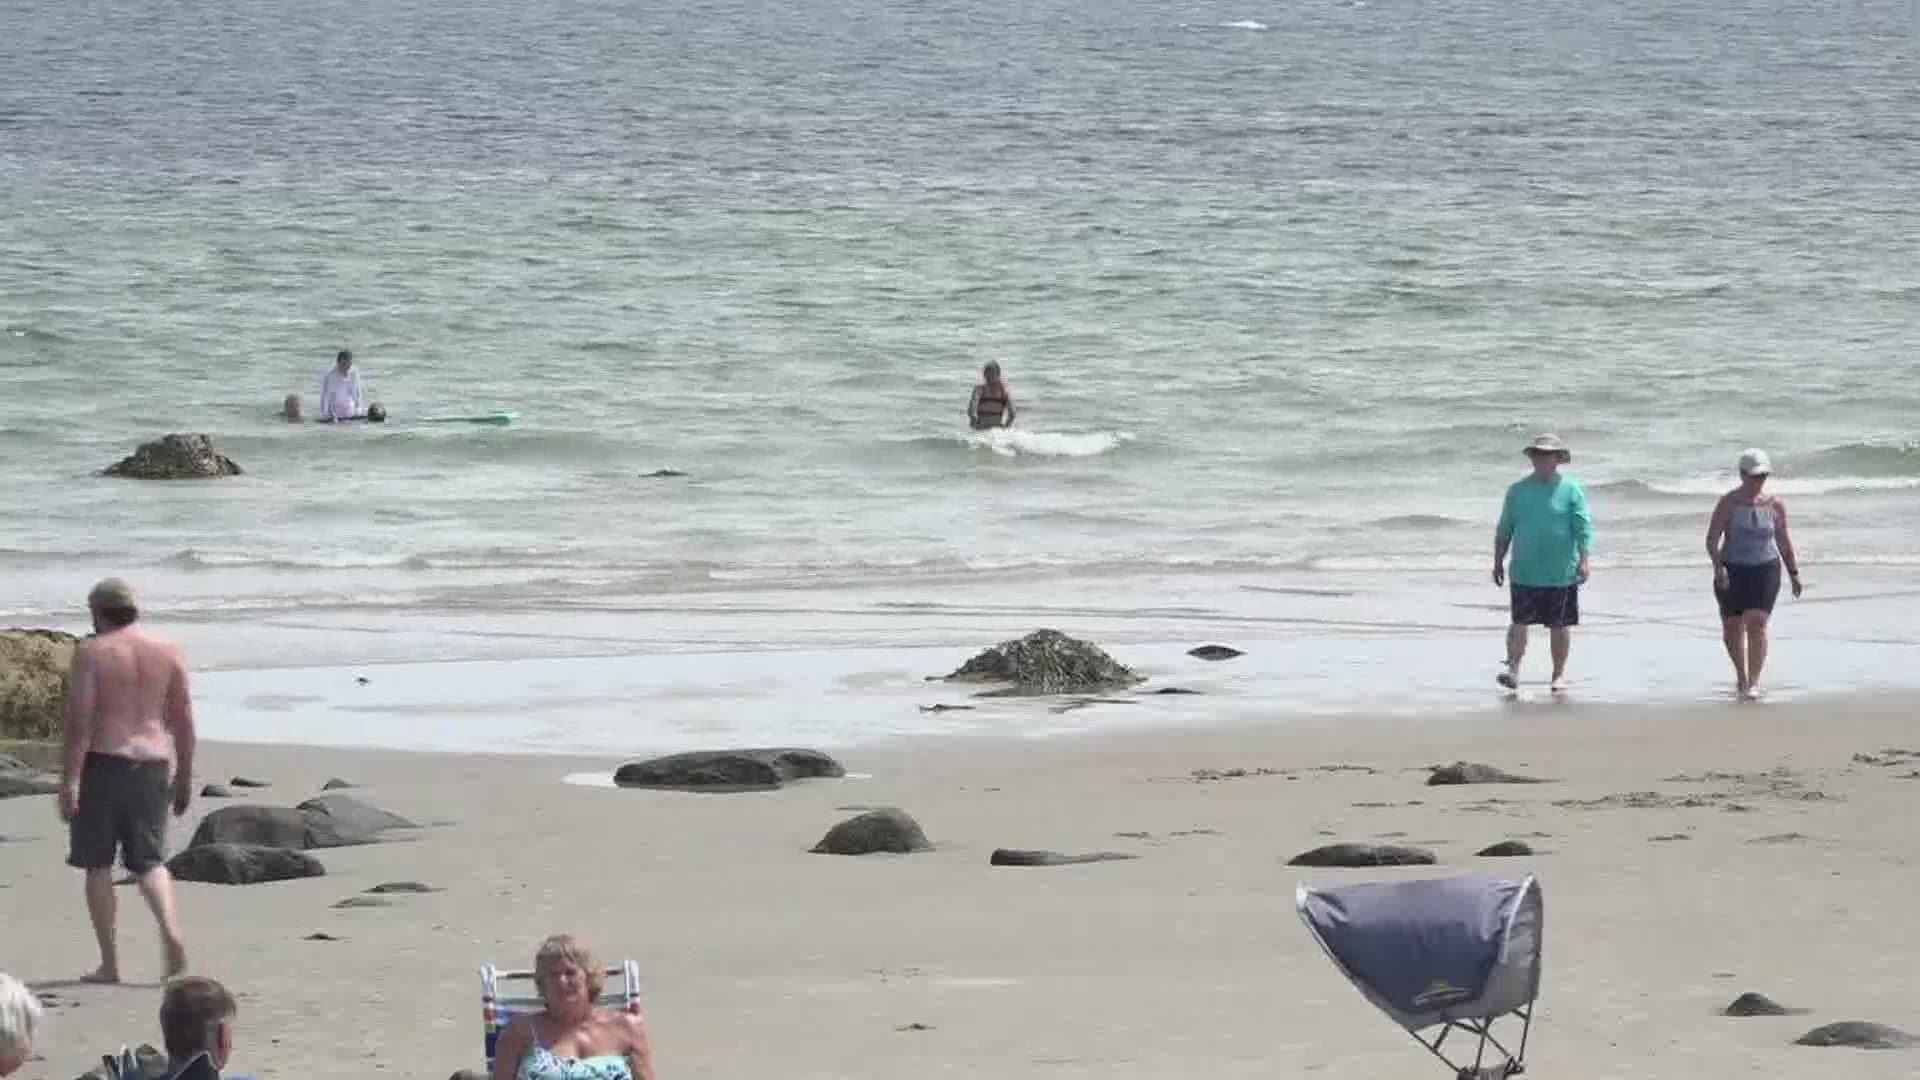 Wells Police announced on Twitter Saturday that all beaches were open today without swimming restrictions since there have been no new shark sightings.